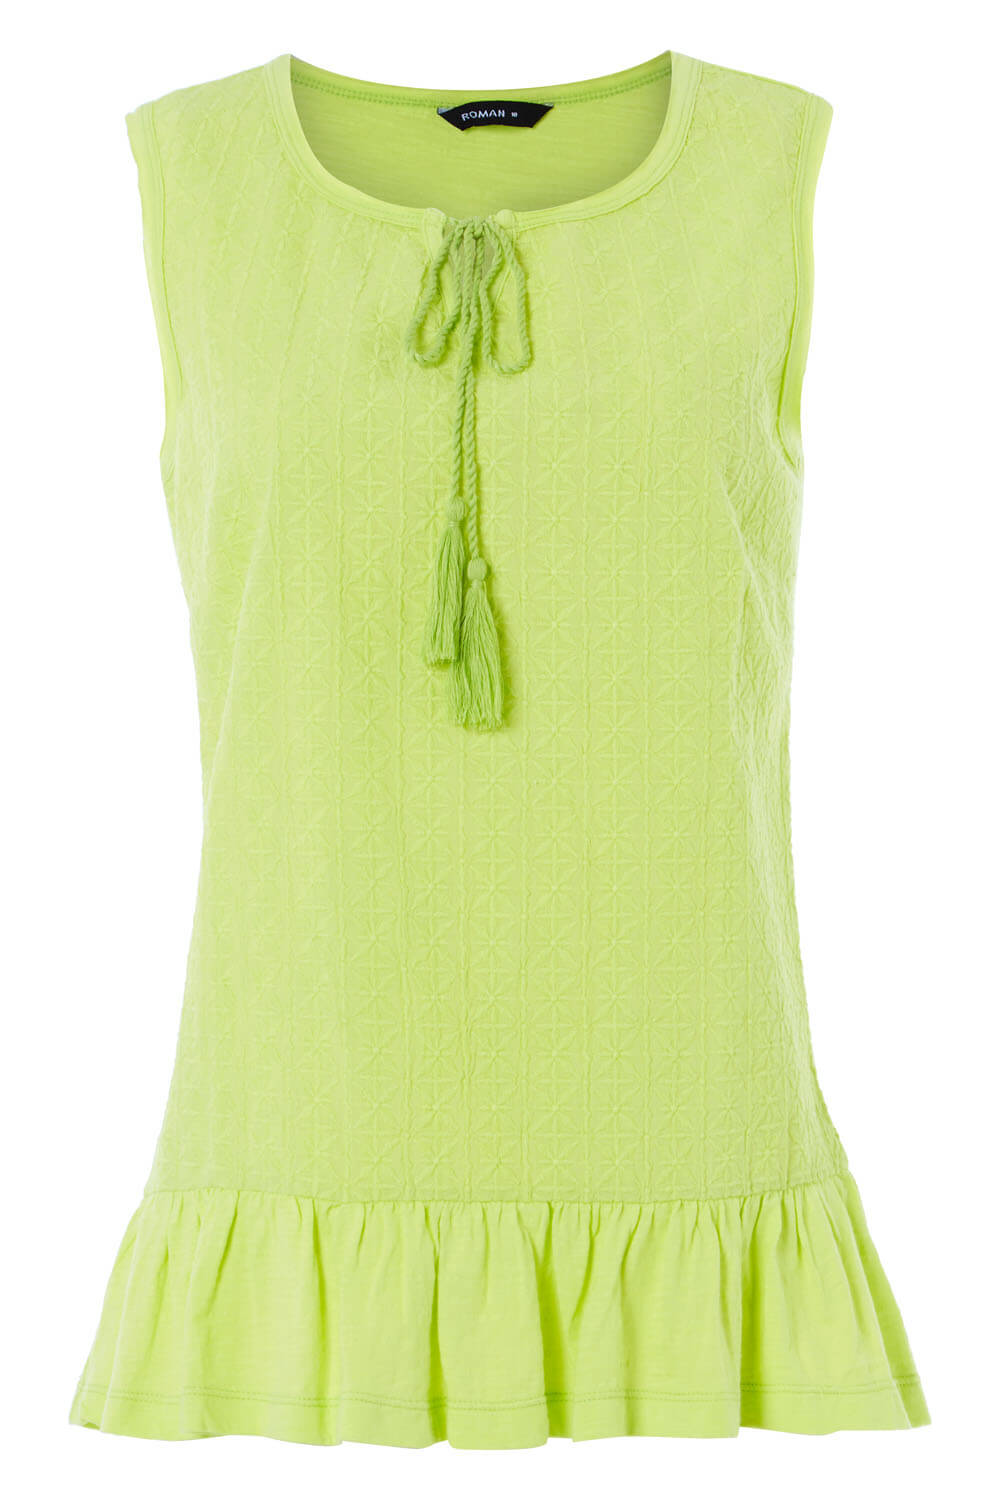 Lime Frill Hem Textured Top, Image 4 of 8